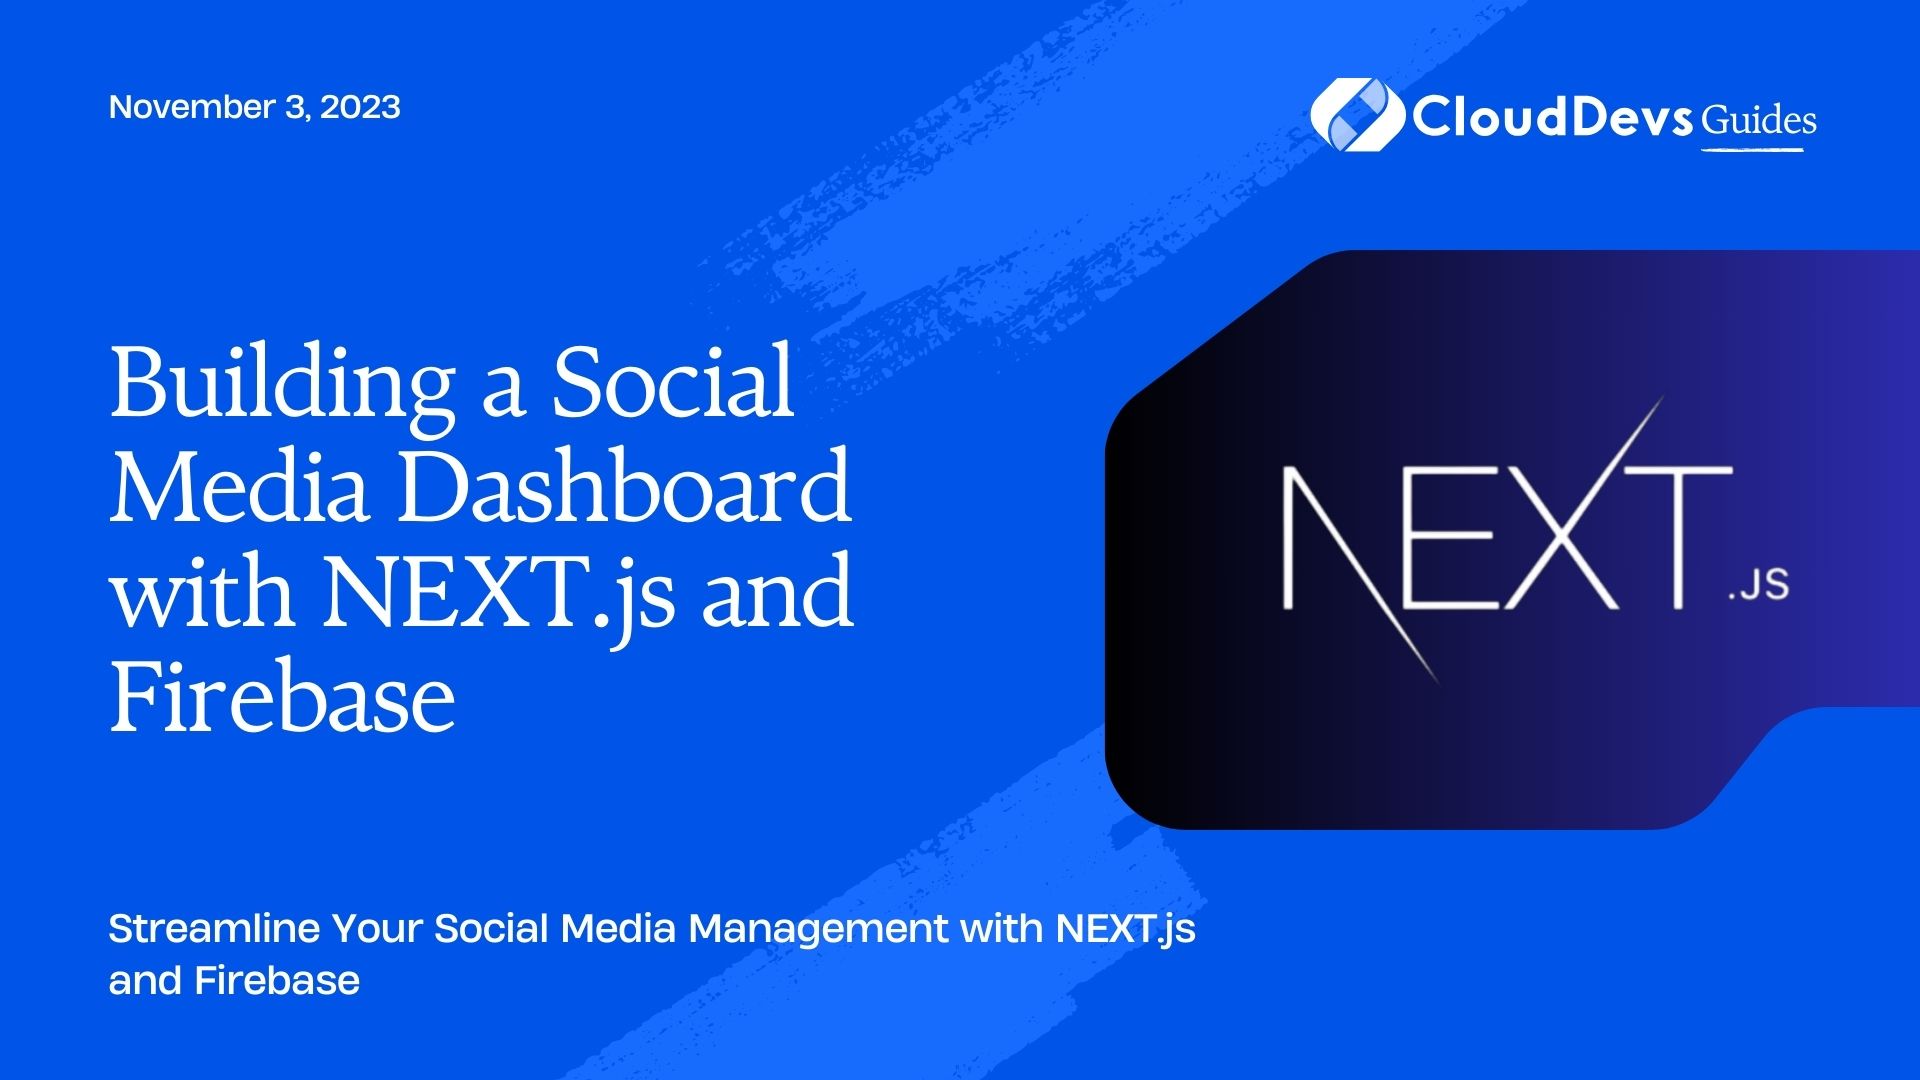 Building a Social Media Dashboard with NEXT.js and Firebase